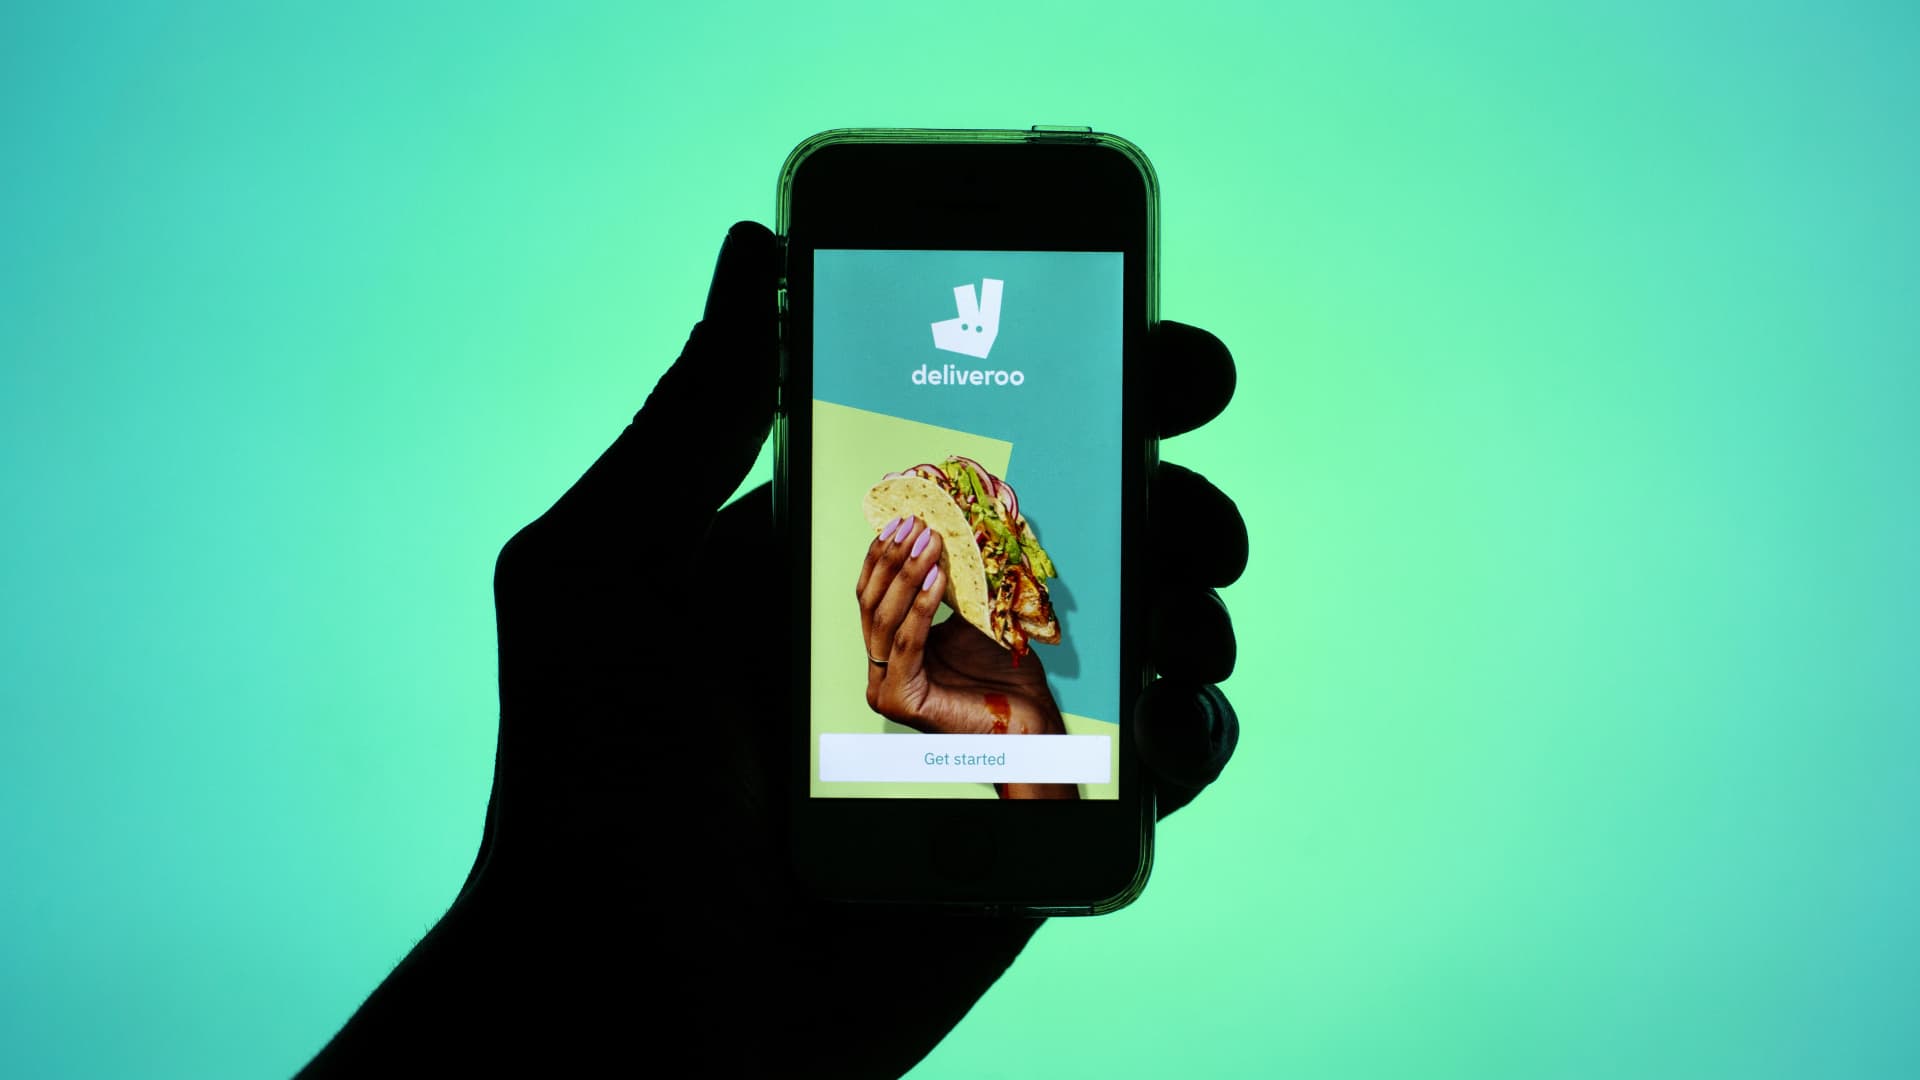 The Deliveroo app displayed on a smartphone screen.